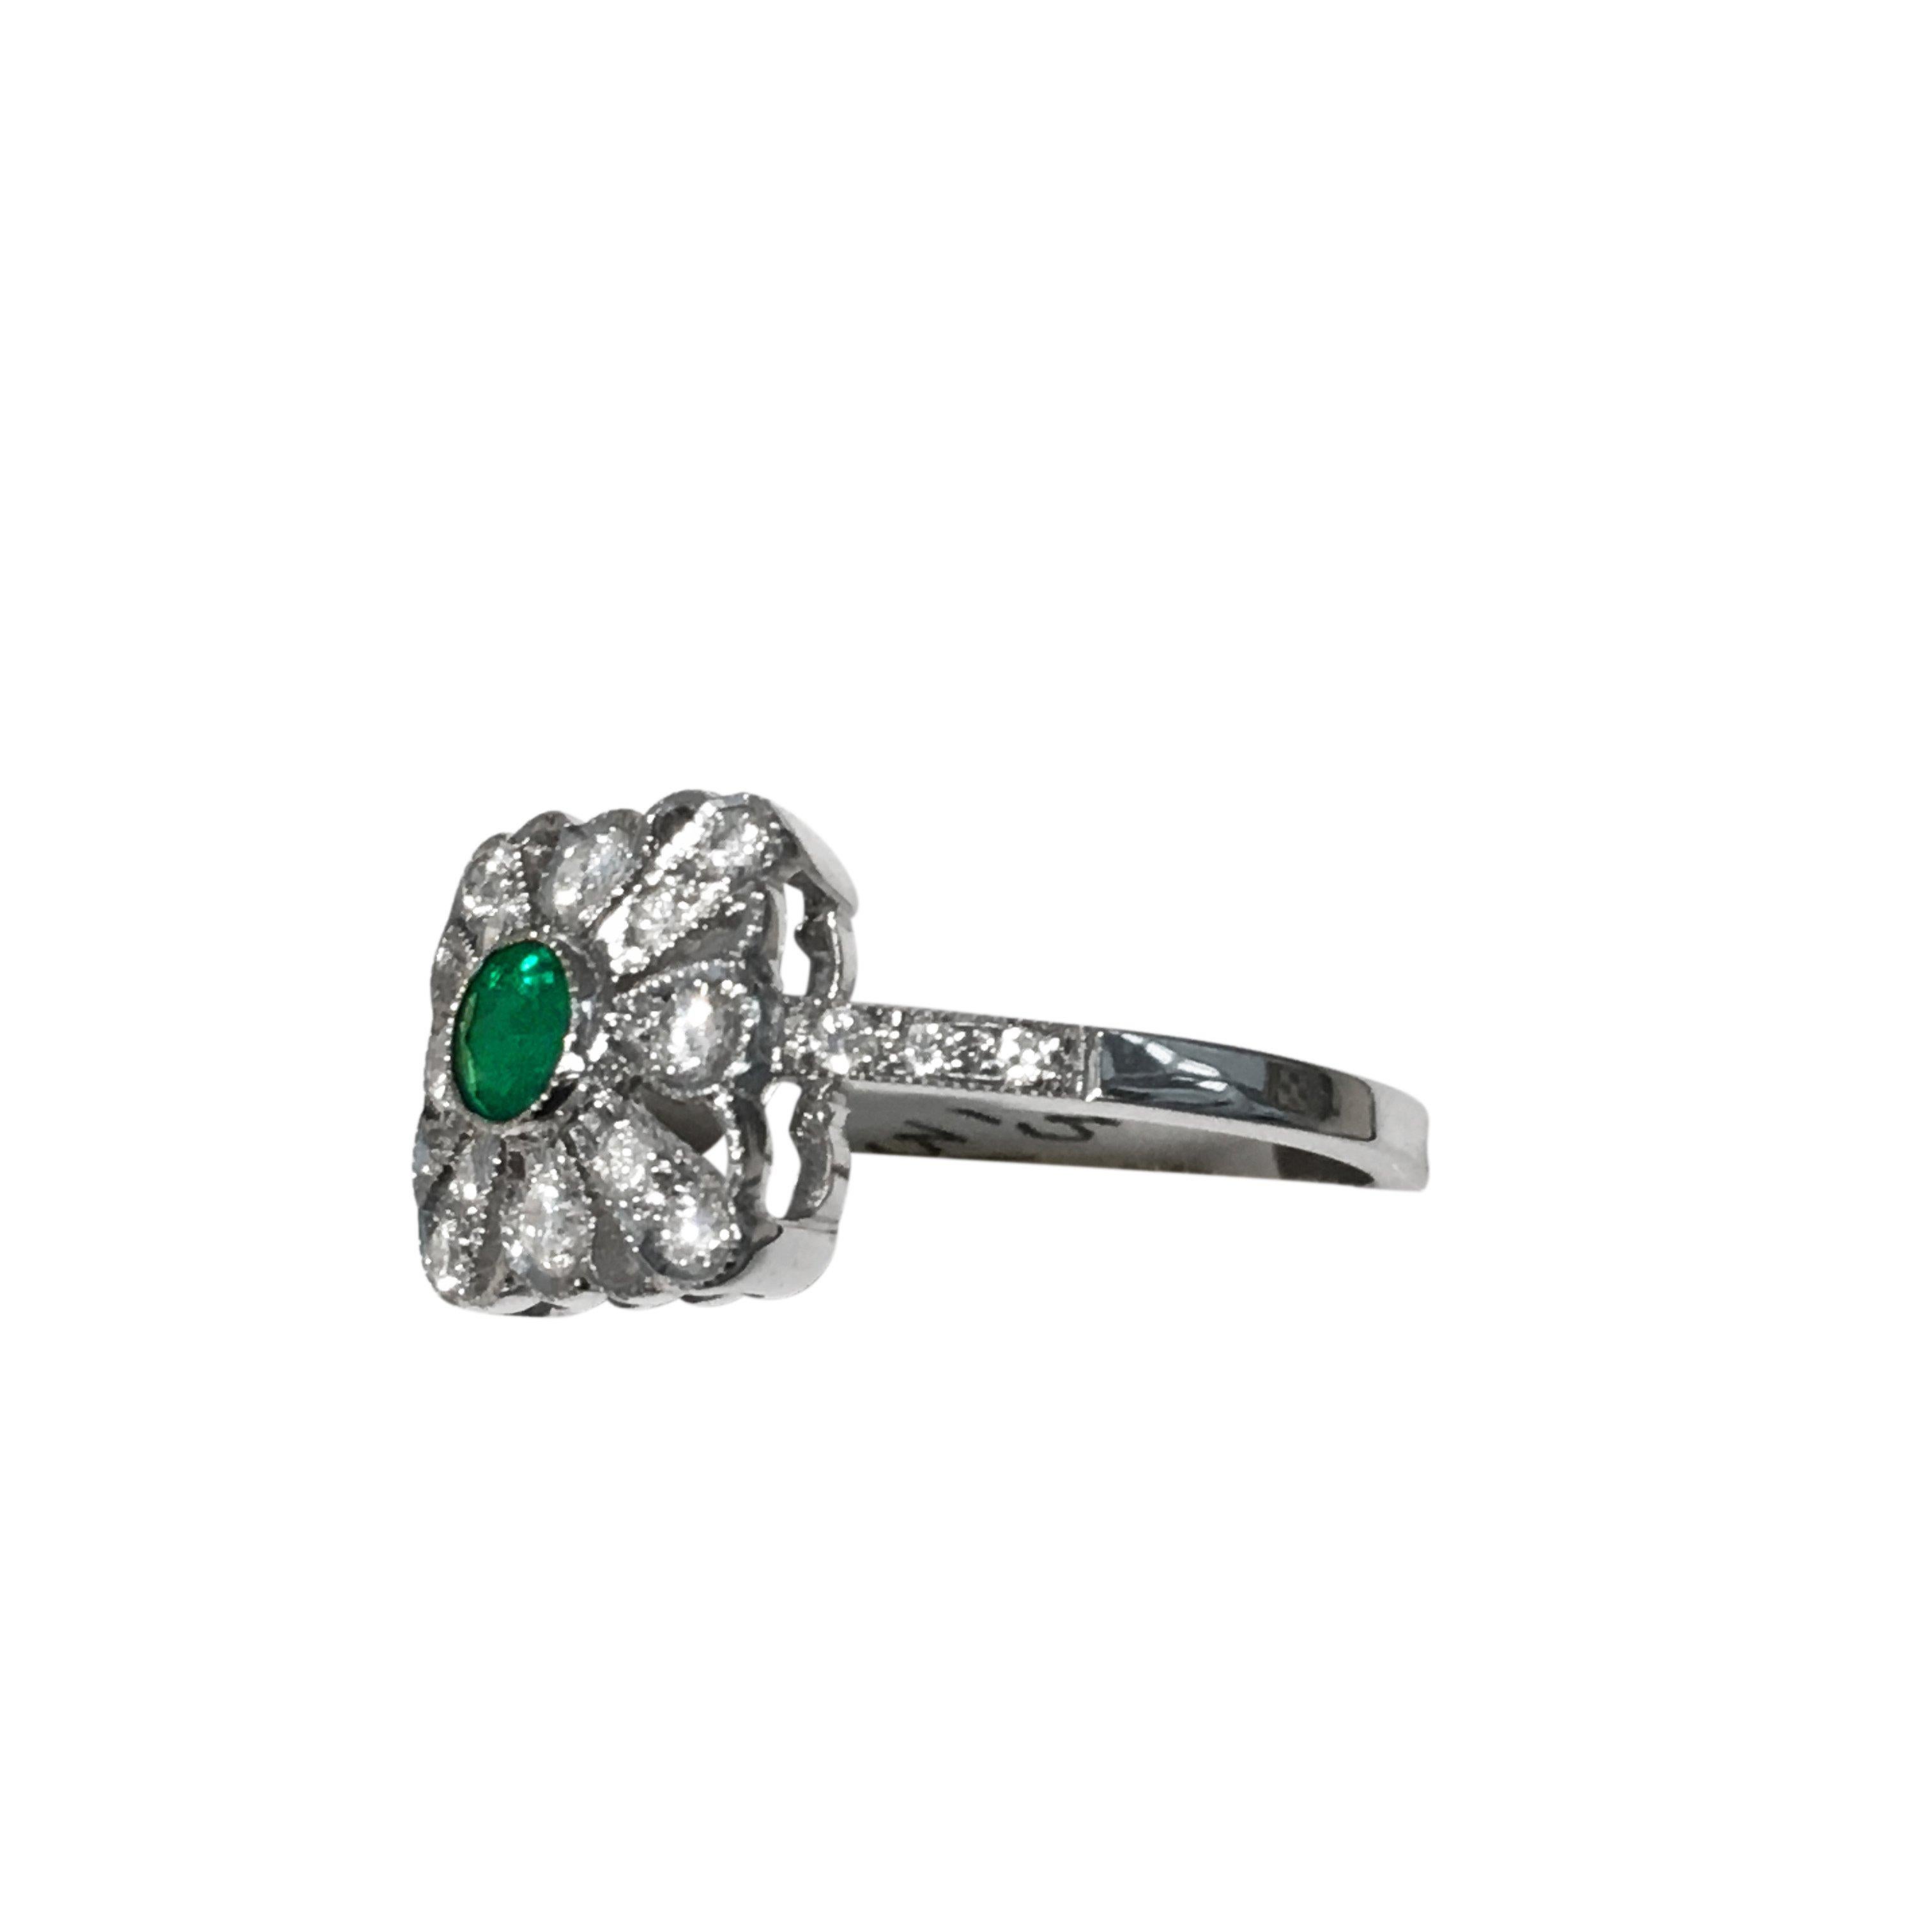 Art Deco Style 18 Carat White Gold Diamond Emerald Engagement Ring In New Condition For Sale In Glasgow, Glasgow